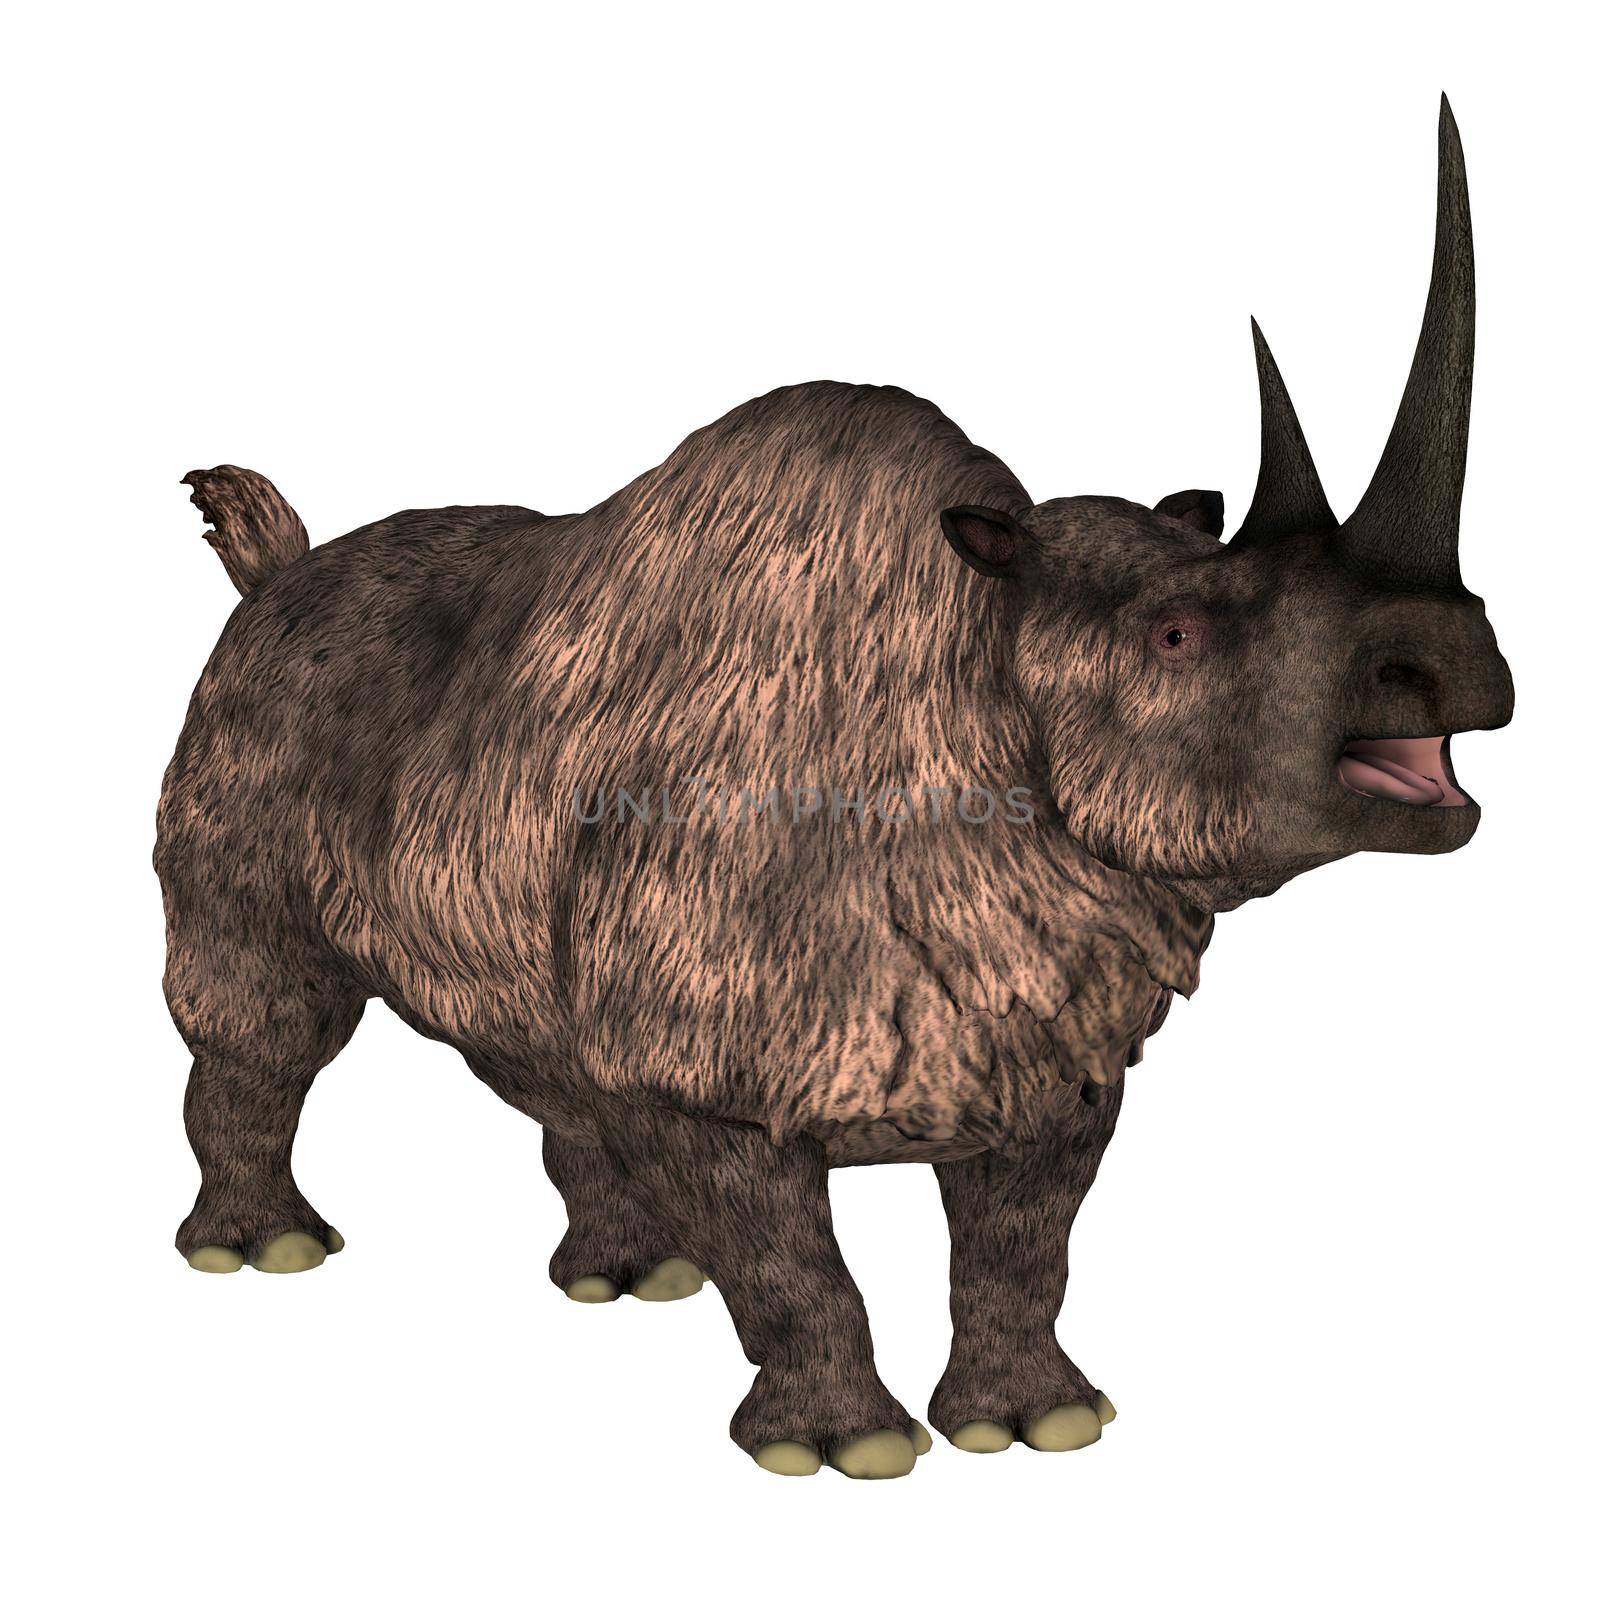 The Woolly rhinoceros was a herbivorous mammal that lived in Europe and Asia during the Pleistocene Period.